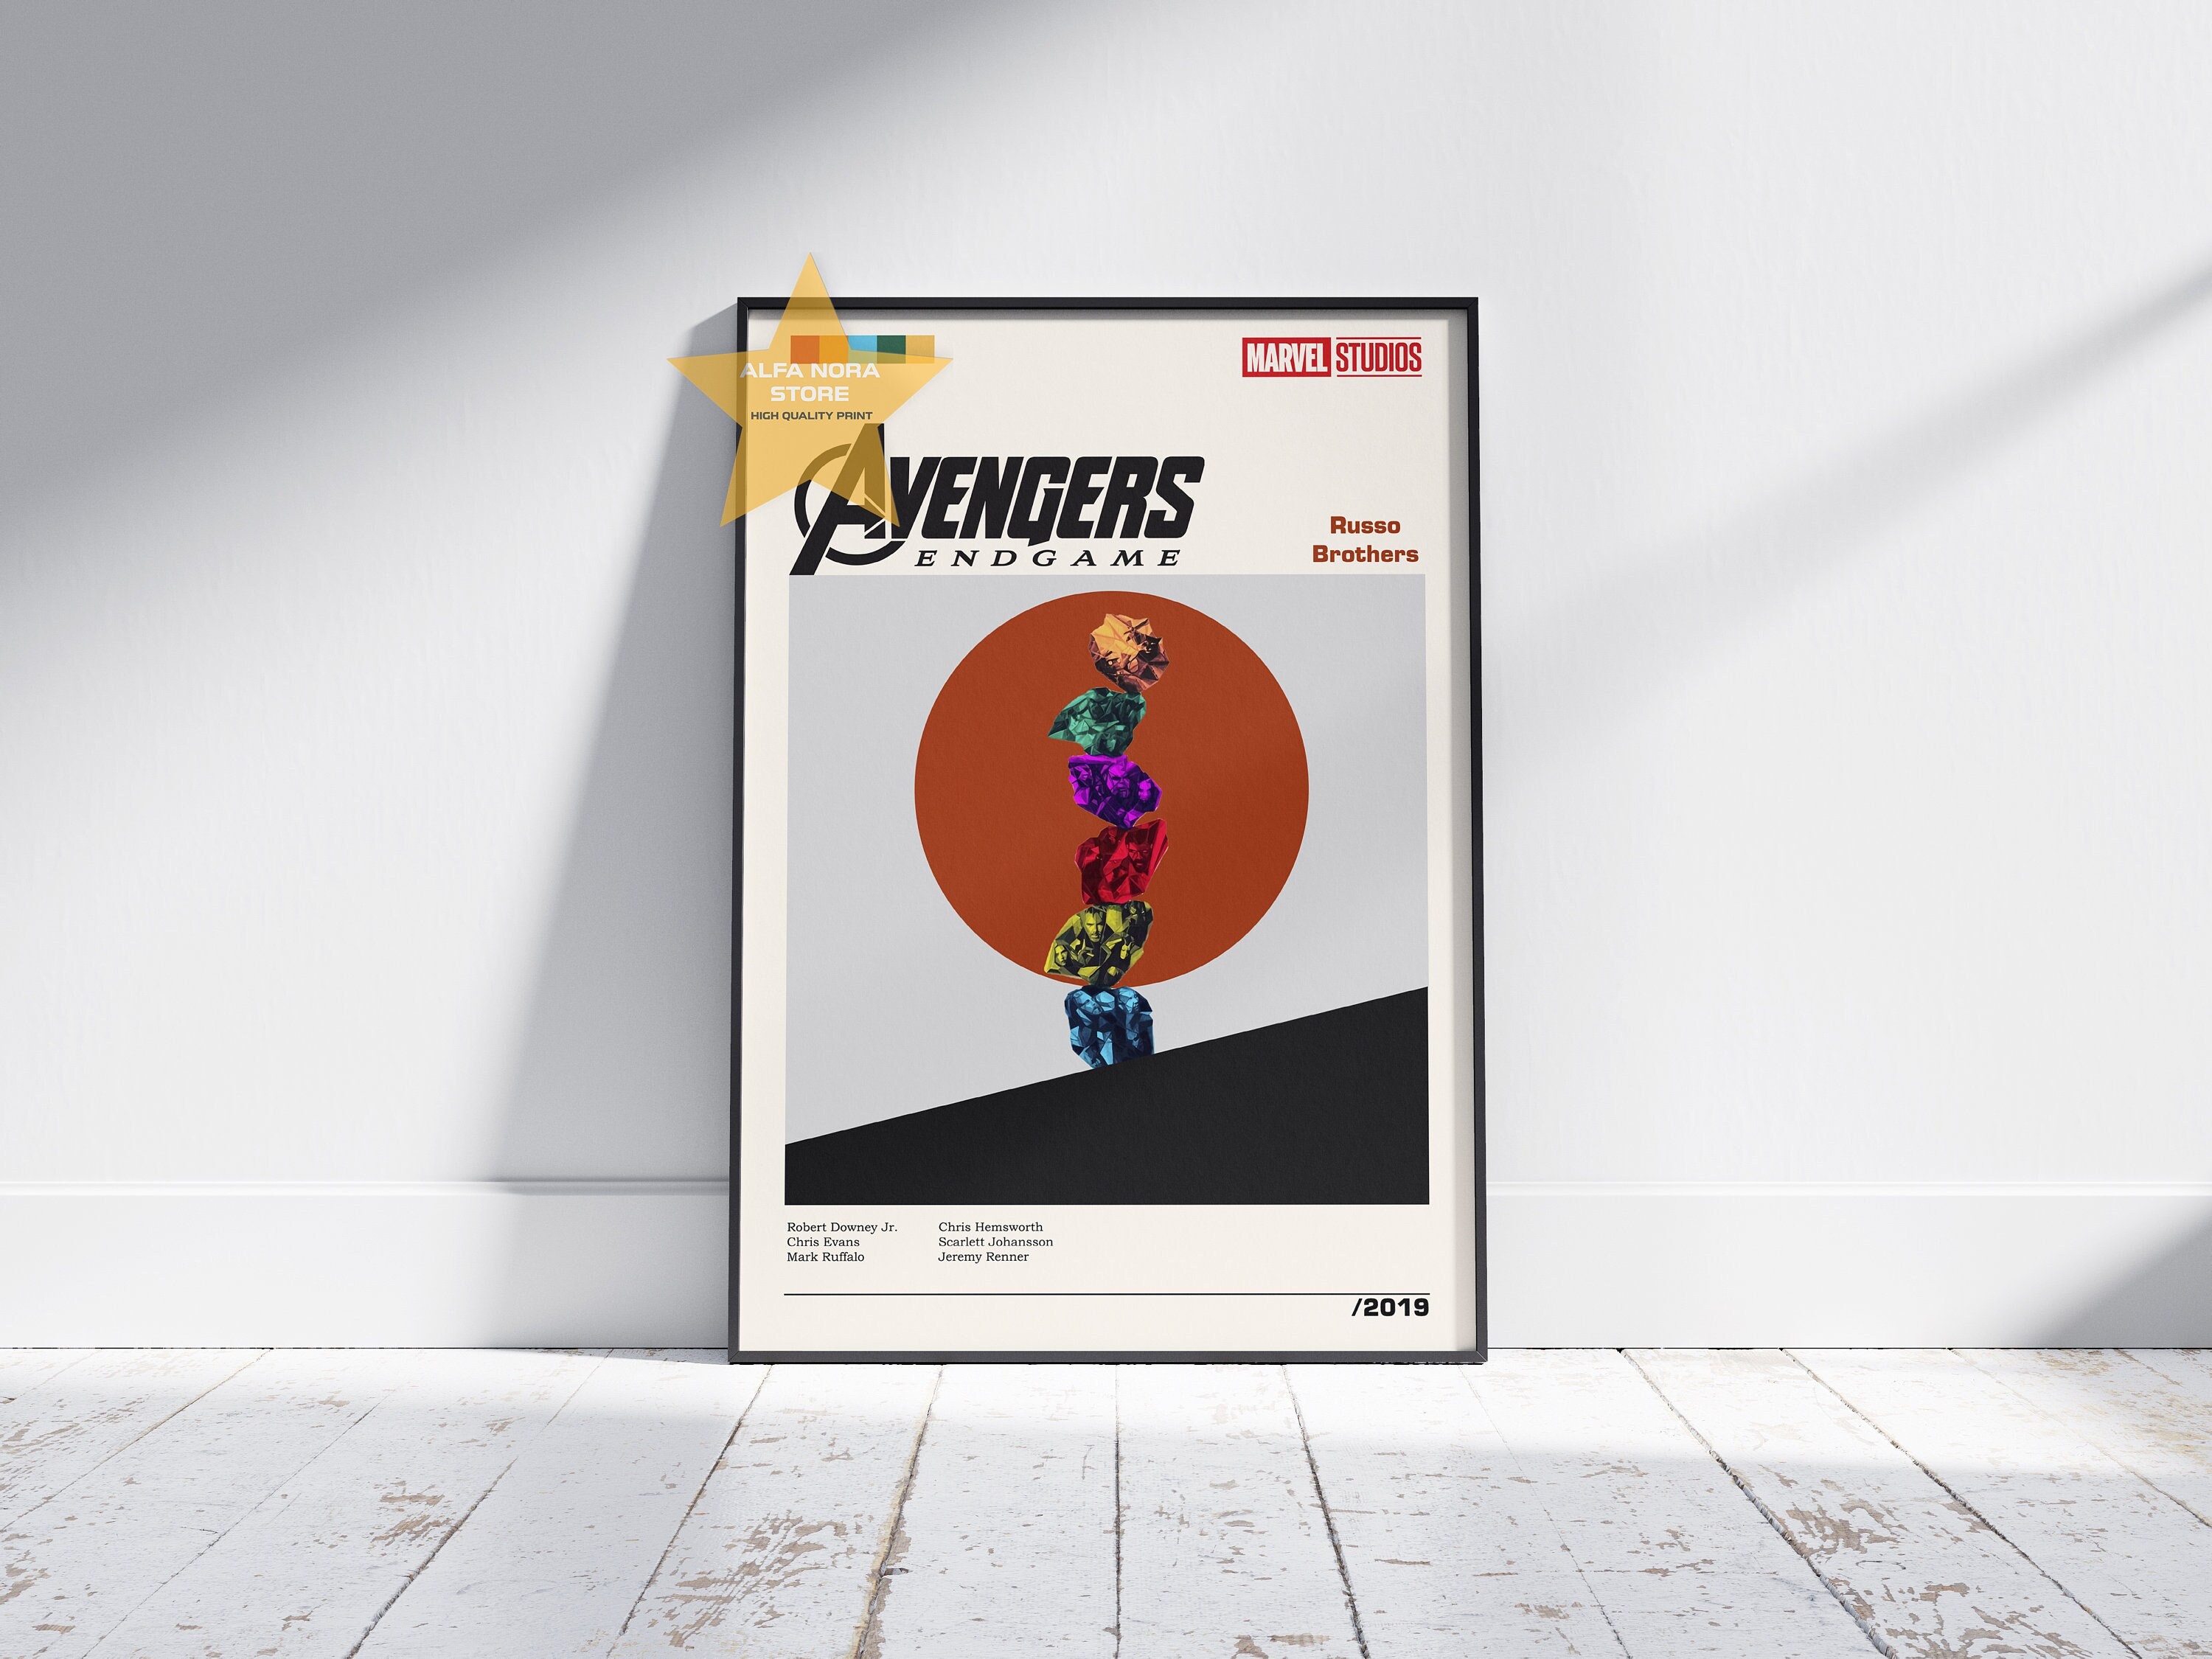 Avengers: Endgame Movie Poster Framed and Ready to Hang. -  Portugal